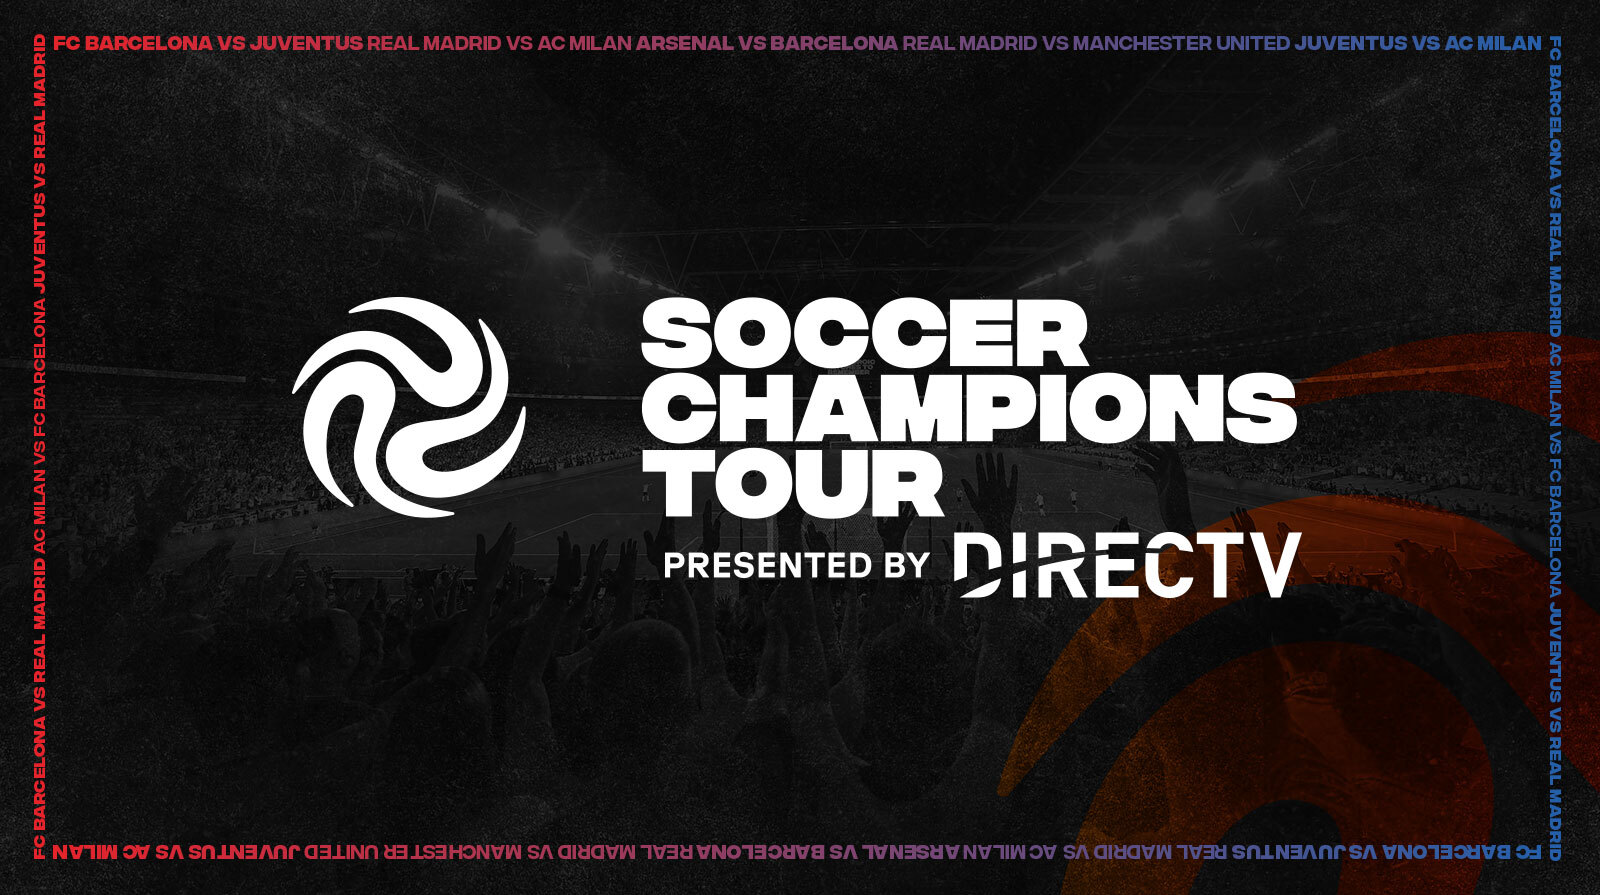 Soccer Champions Tour presented by DIRECTV